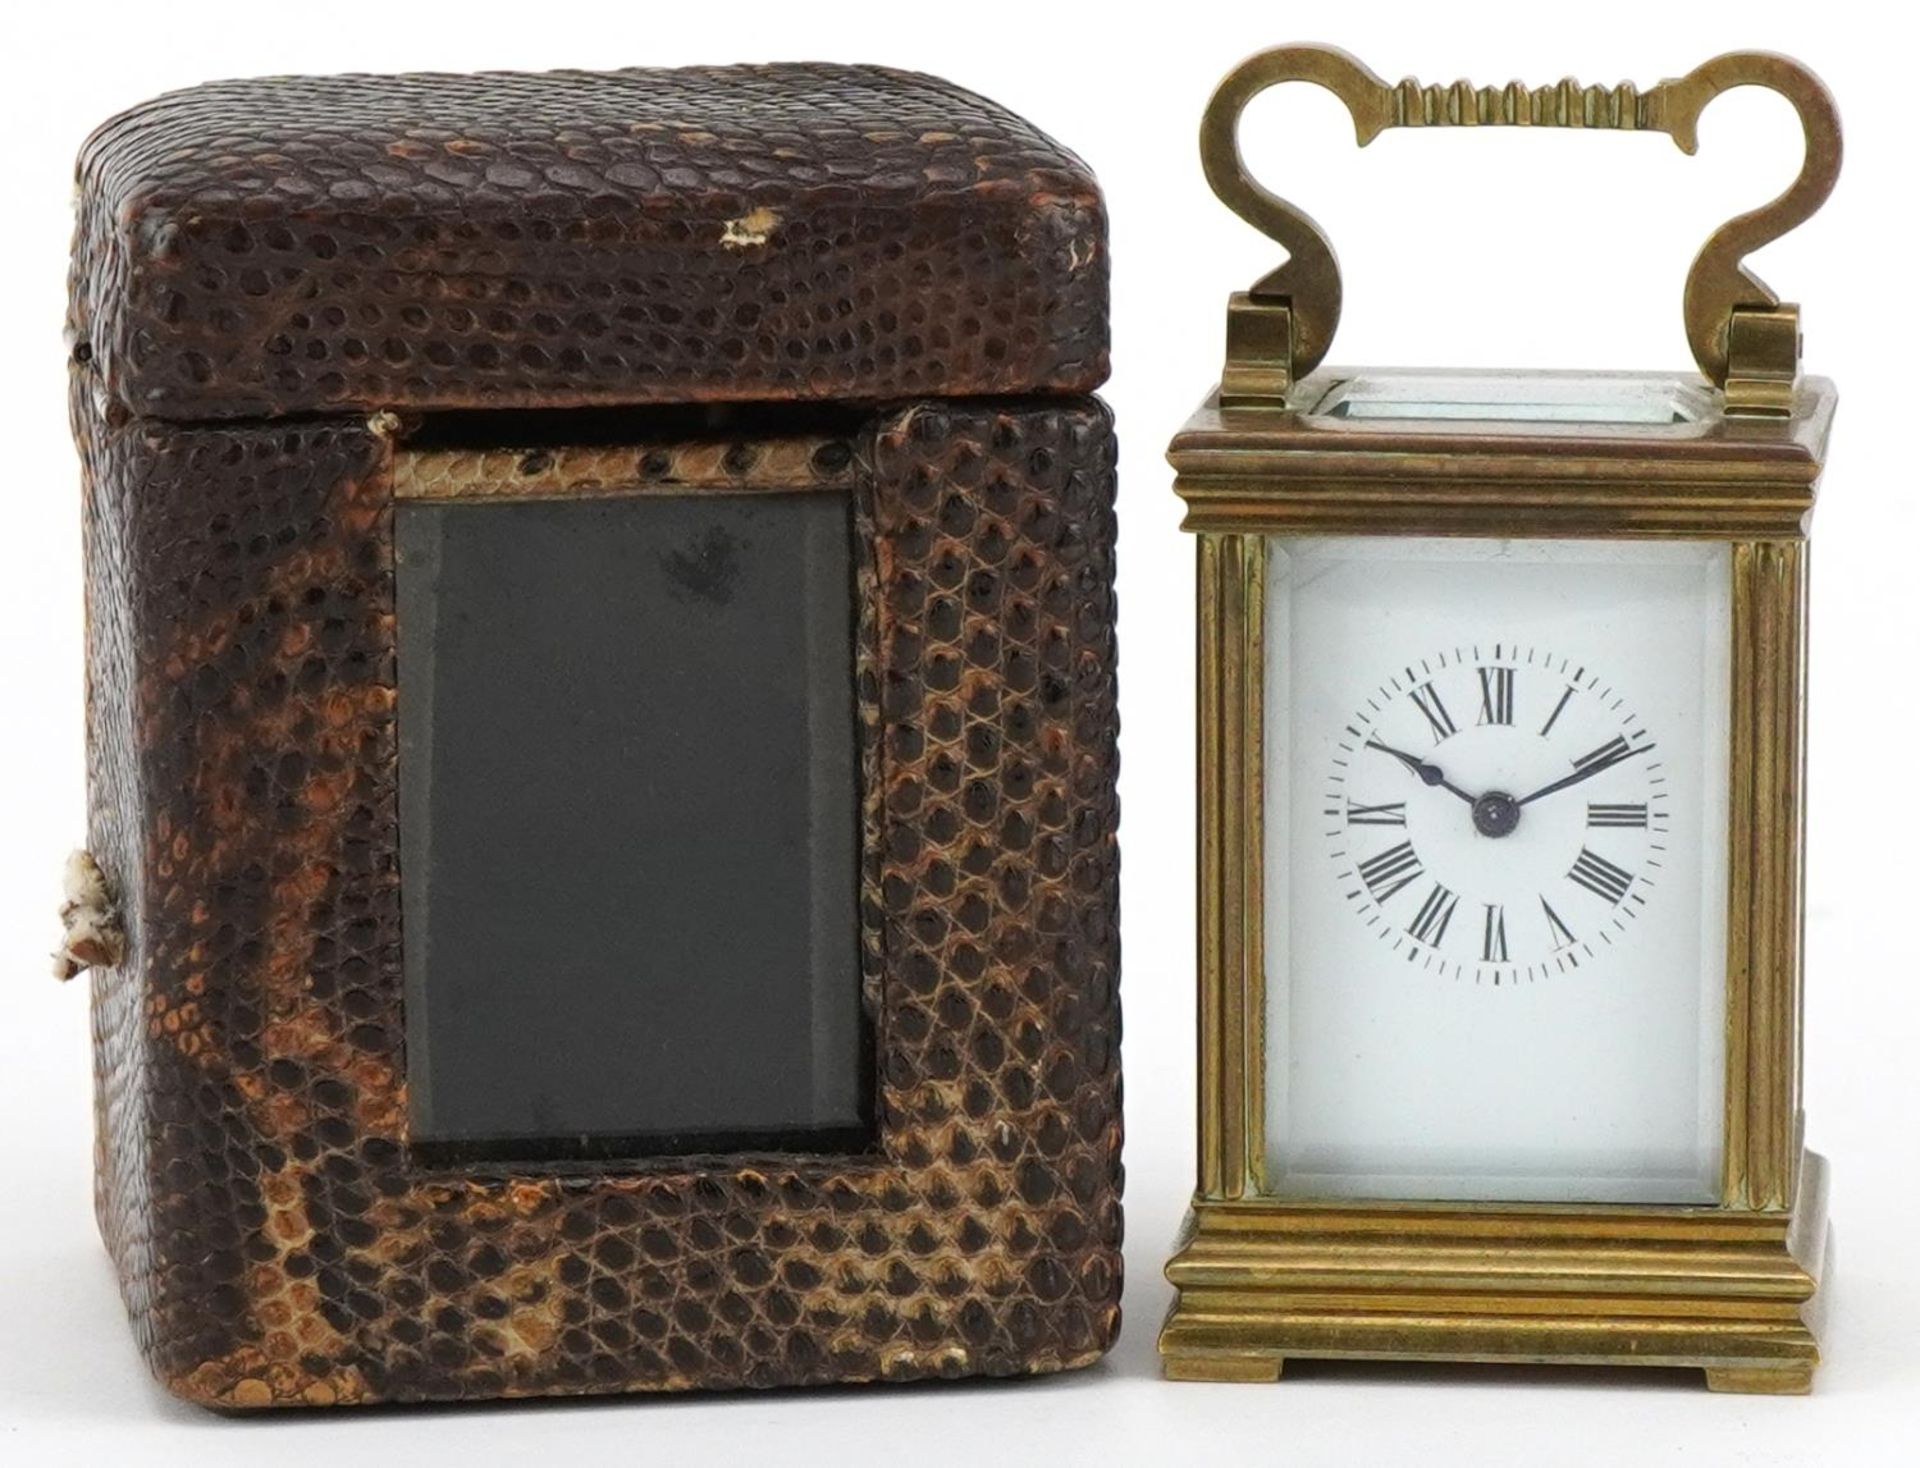 Miniature brass cased carriage clock with case, the circular dial having Roman numerals, the